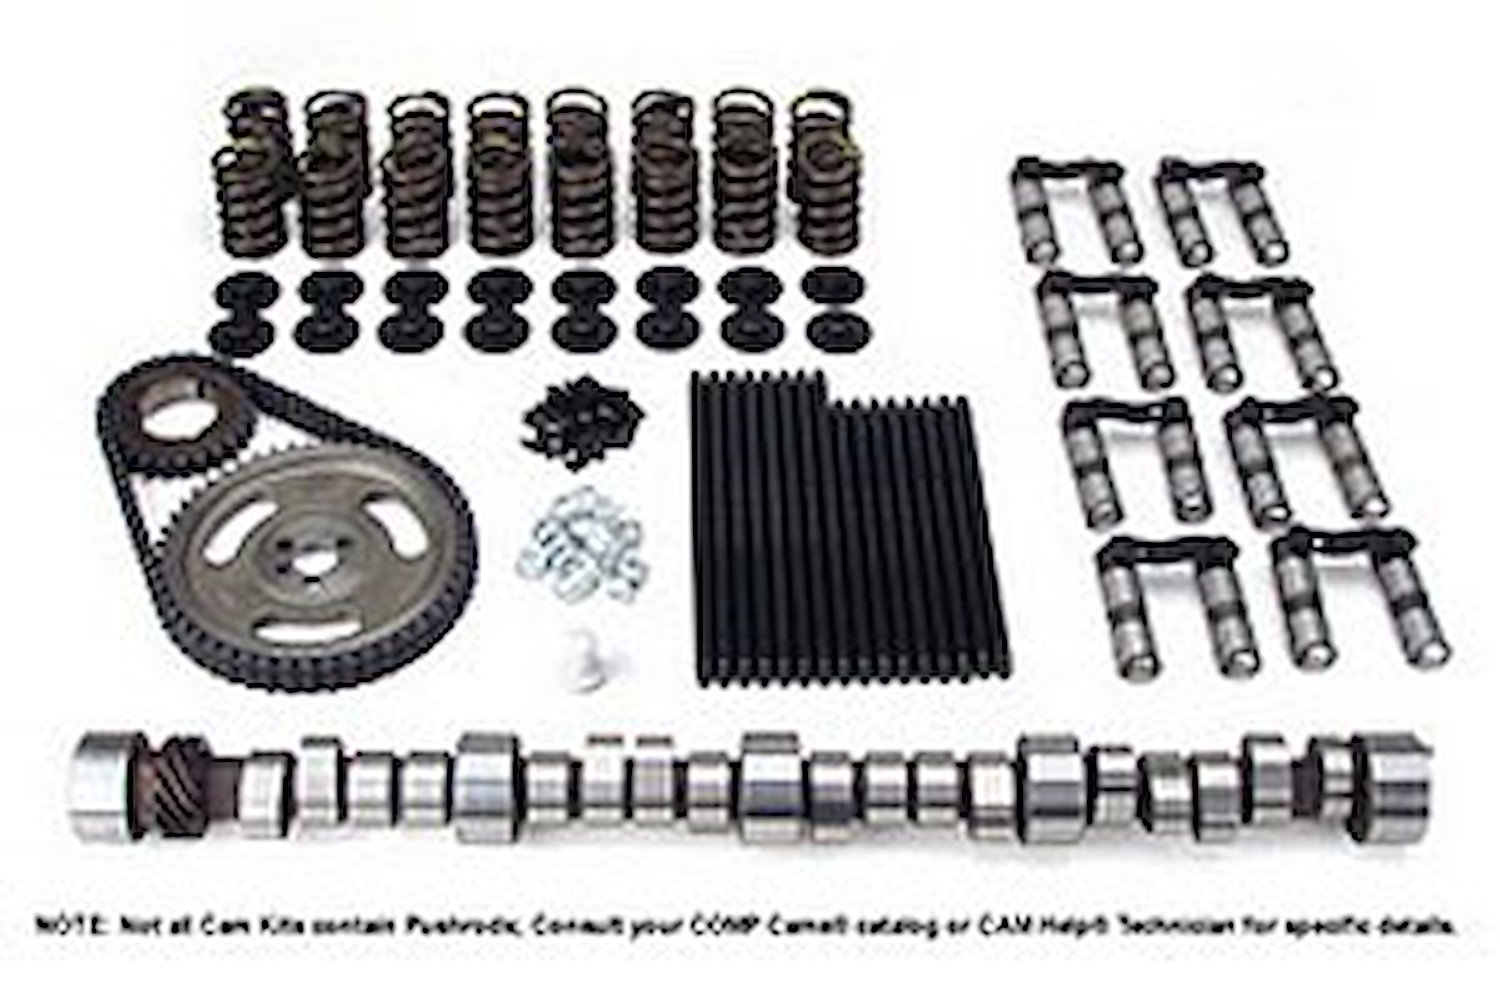 Magnum Hydraulic Roller Camshaft Complete Kit Chevy Small Block 262-400 Retro Fit Lift: .500"/.500"